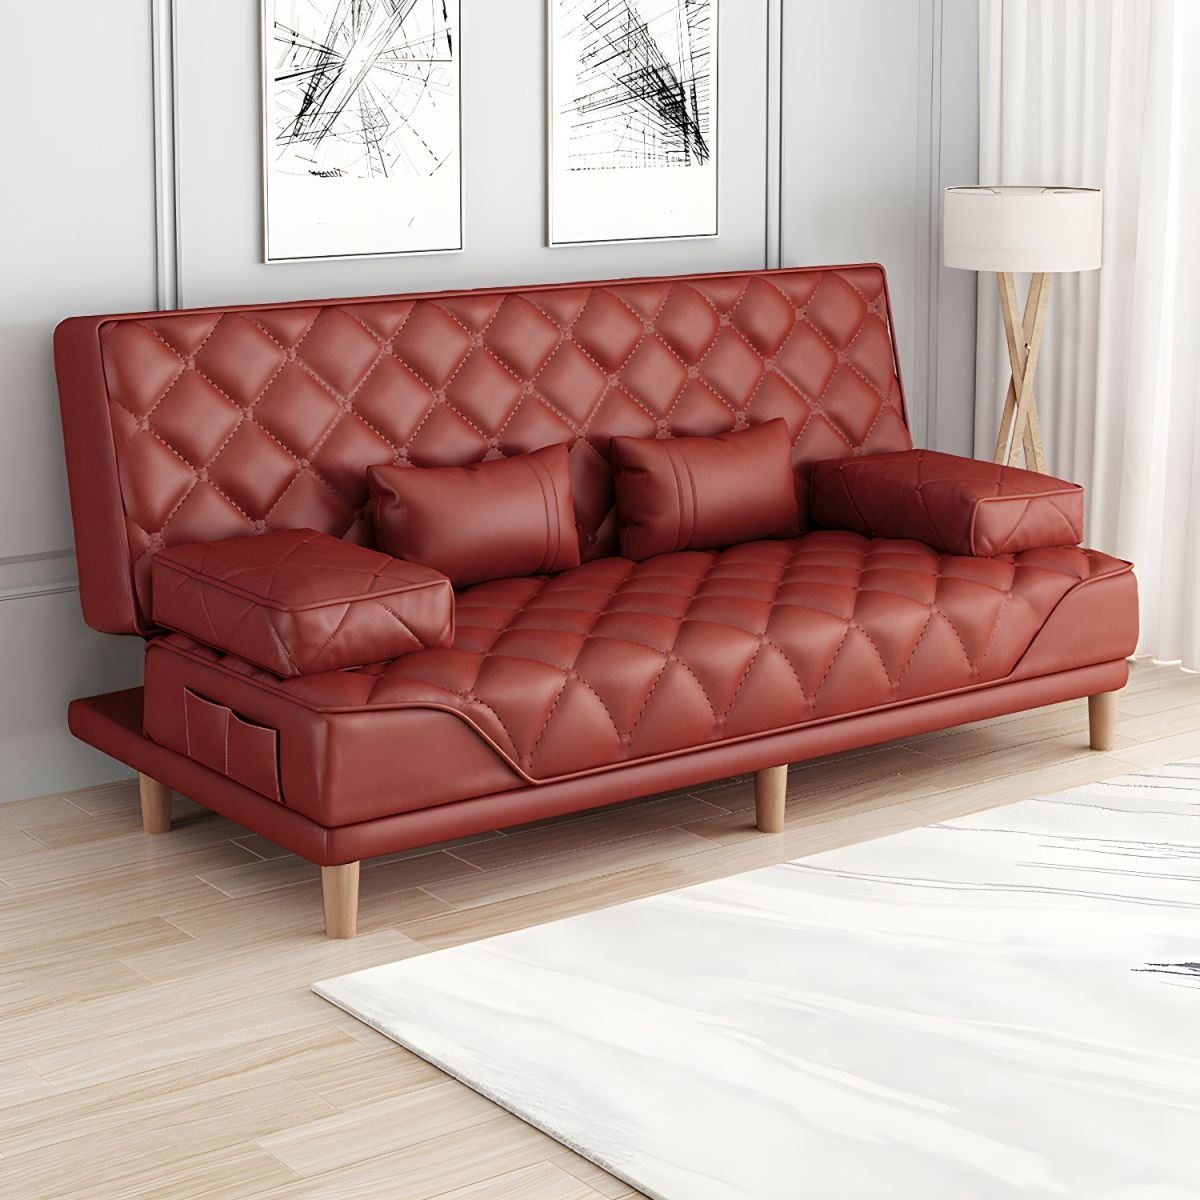 Contemporary Tight Back Convertible Sofa and Chaise with Pillow Top Arm - 47"L x 30"W x 34"H Red Tech Cloth